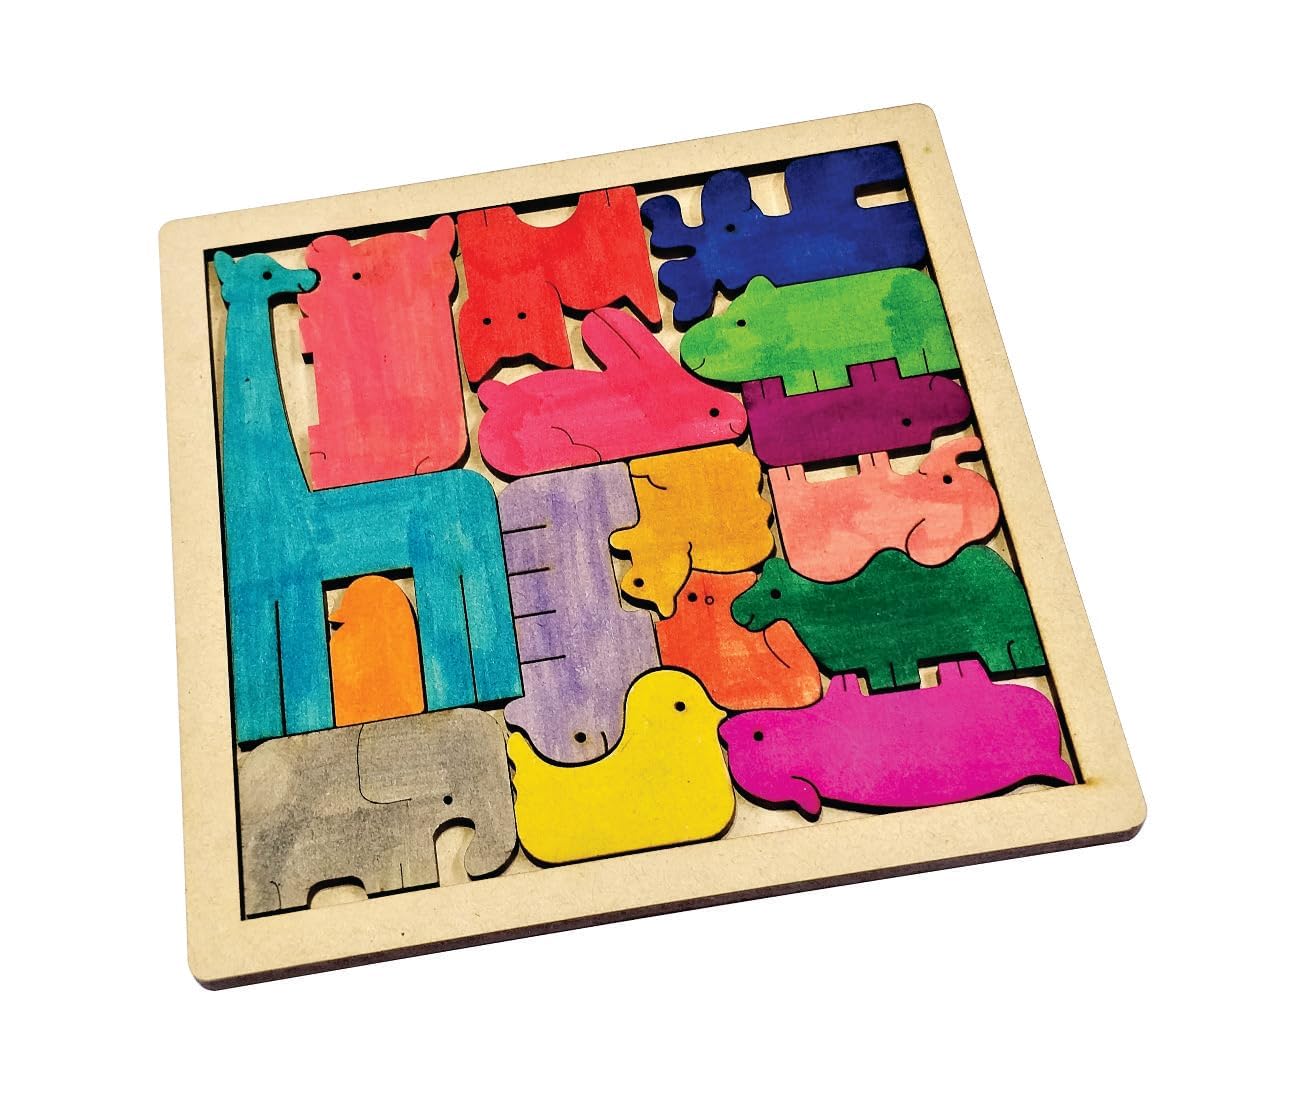 Braintastic Wooden Jigsaw Puzzle Travel Board Game Learning & Creative Educational Intelligence Brain Games Sorting Puzzle Toys for Kids (Animal Puzzle 16 PO16)